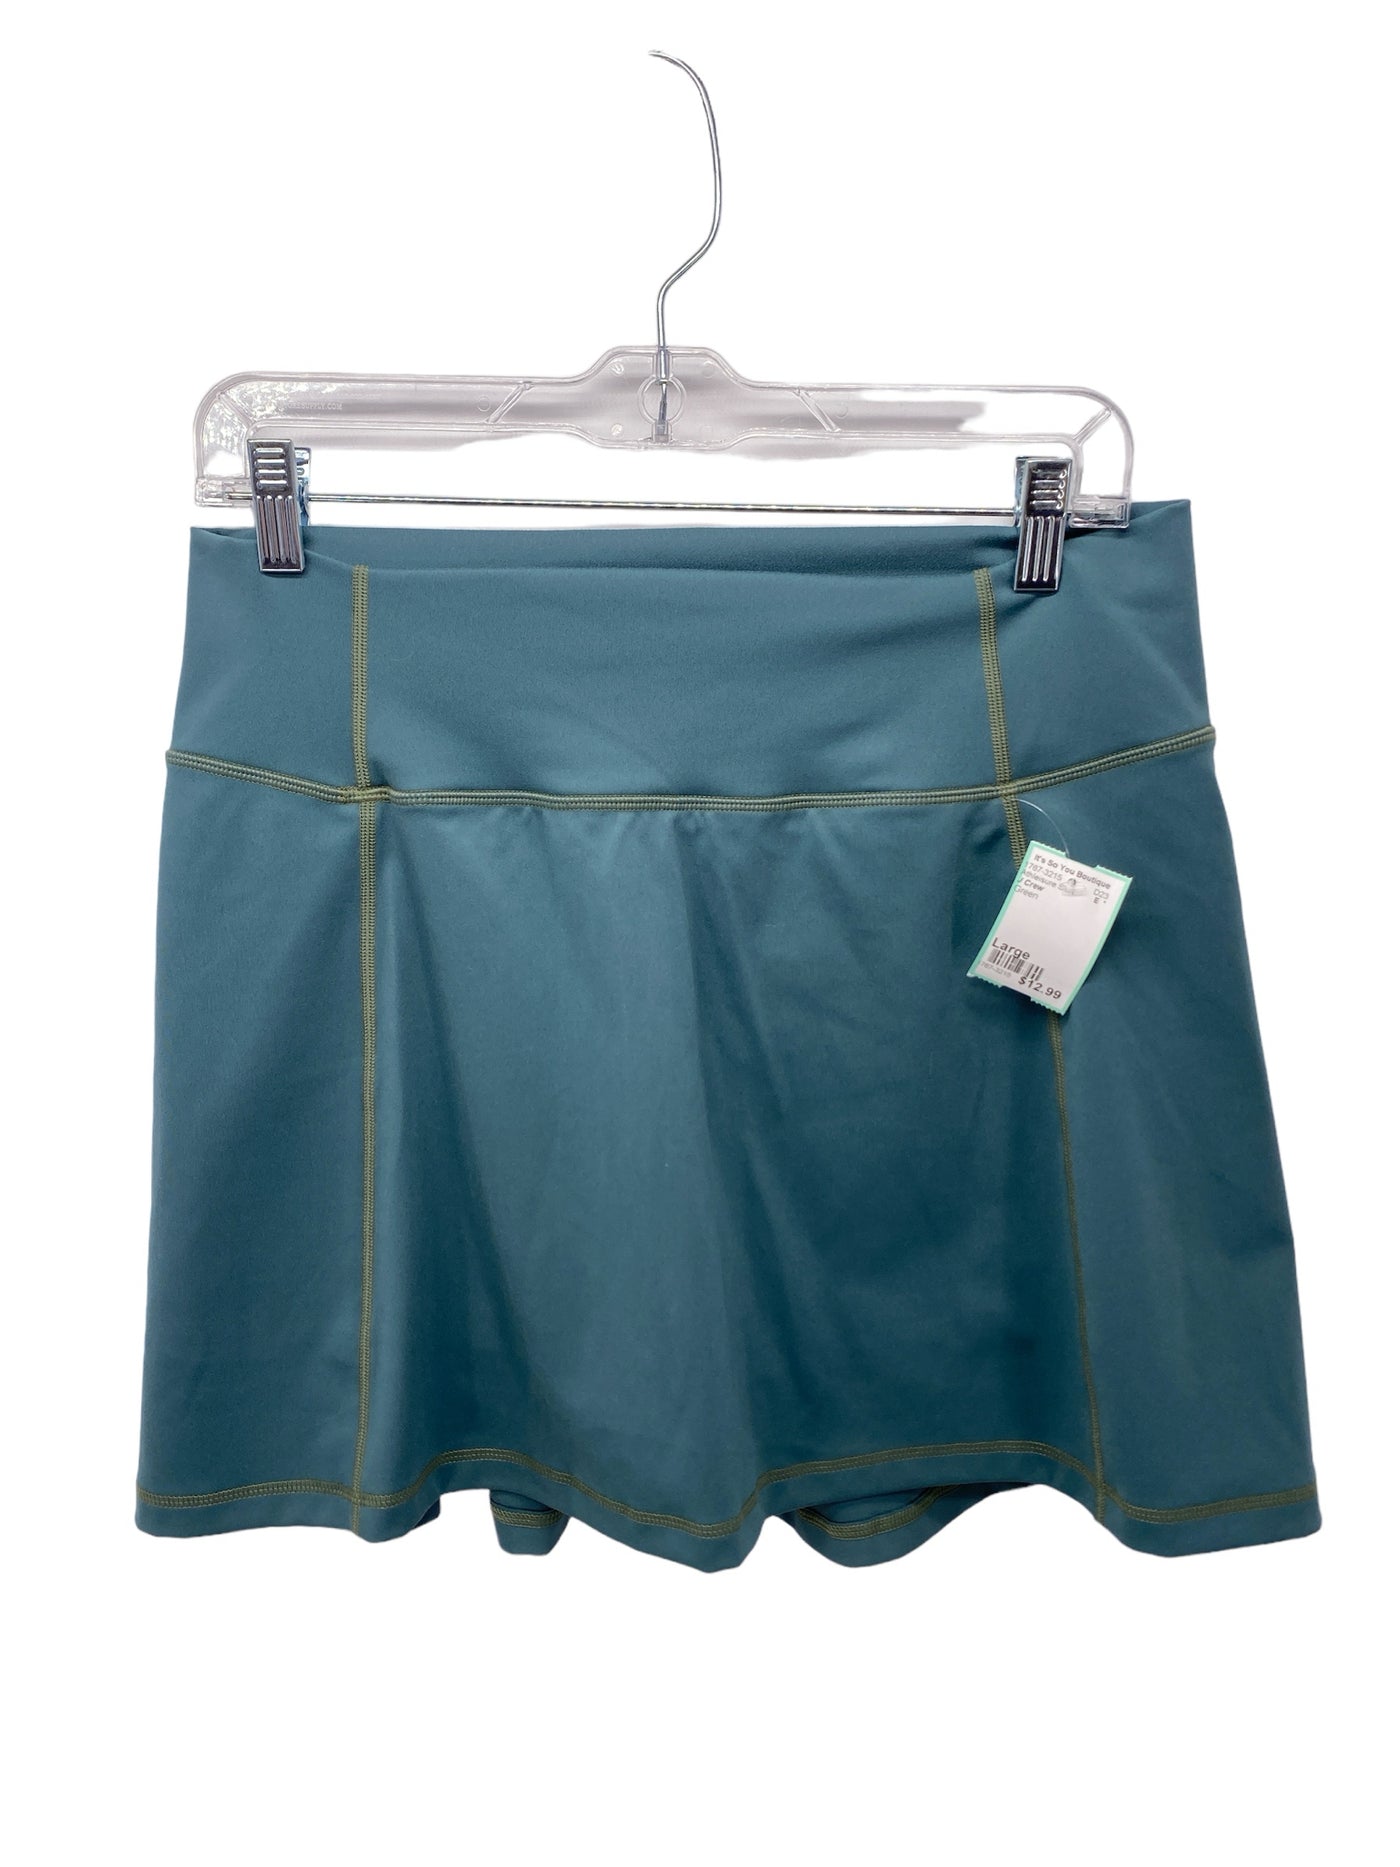 J Crew Misses Size Large Green Athleisure Skirt